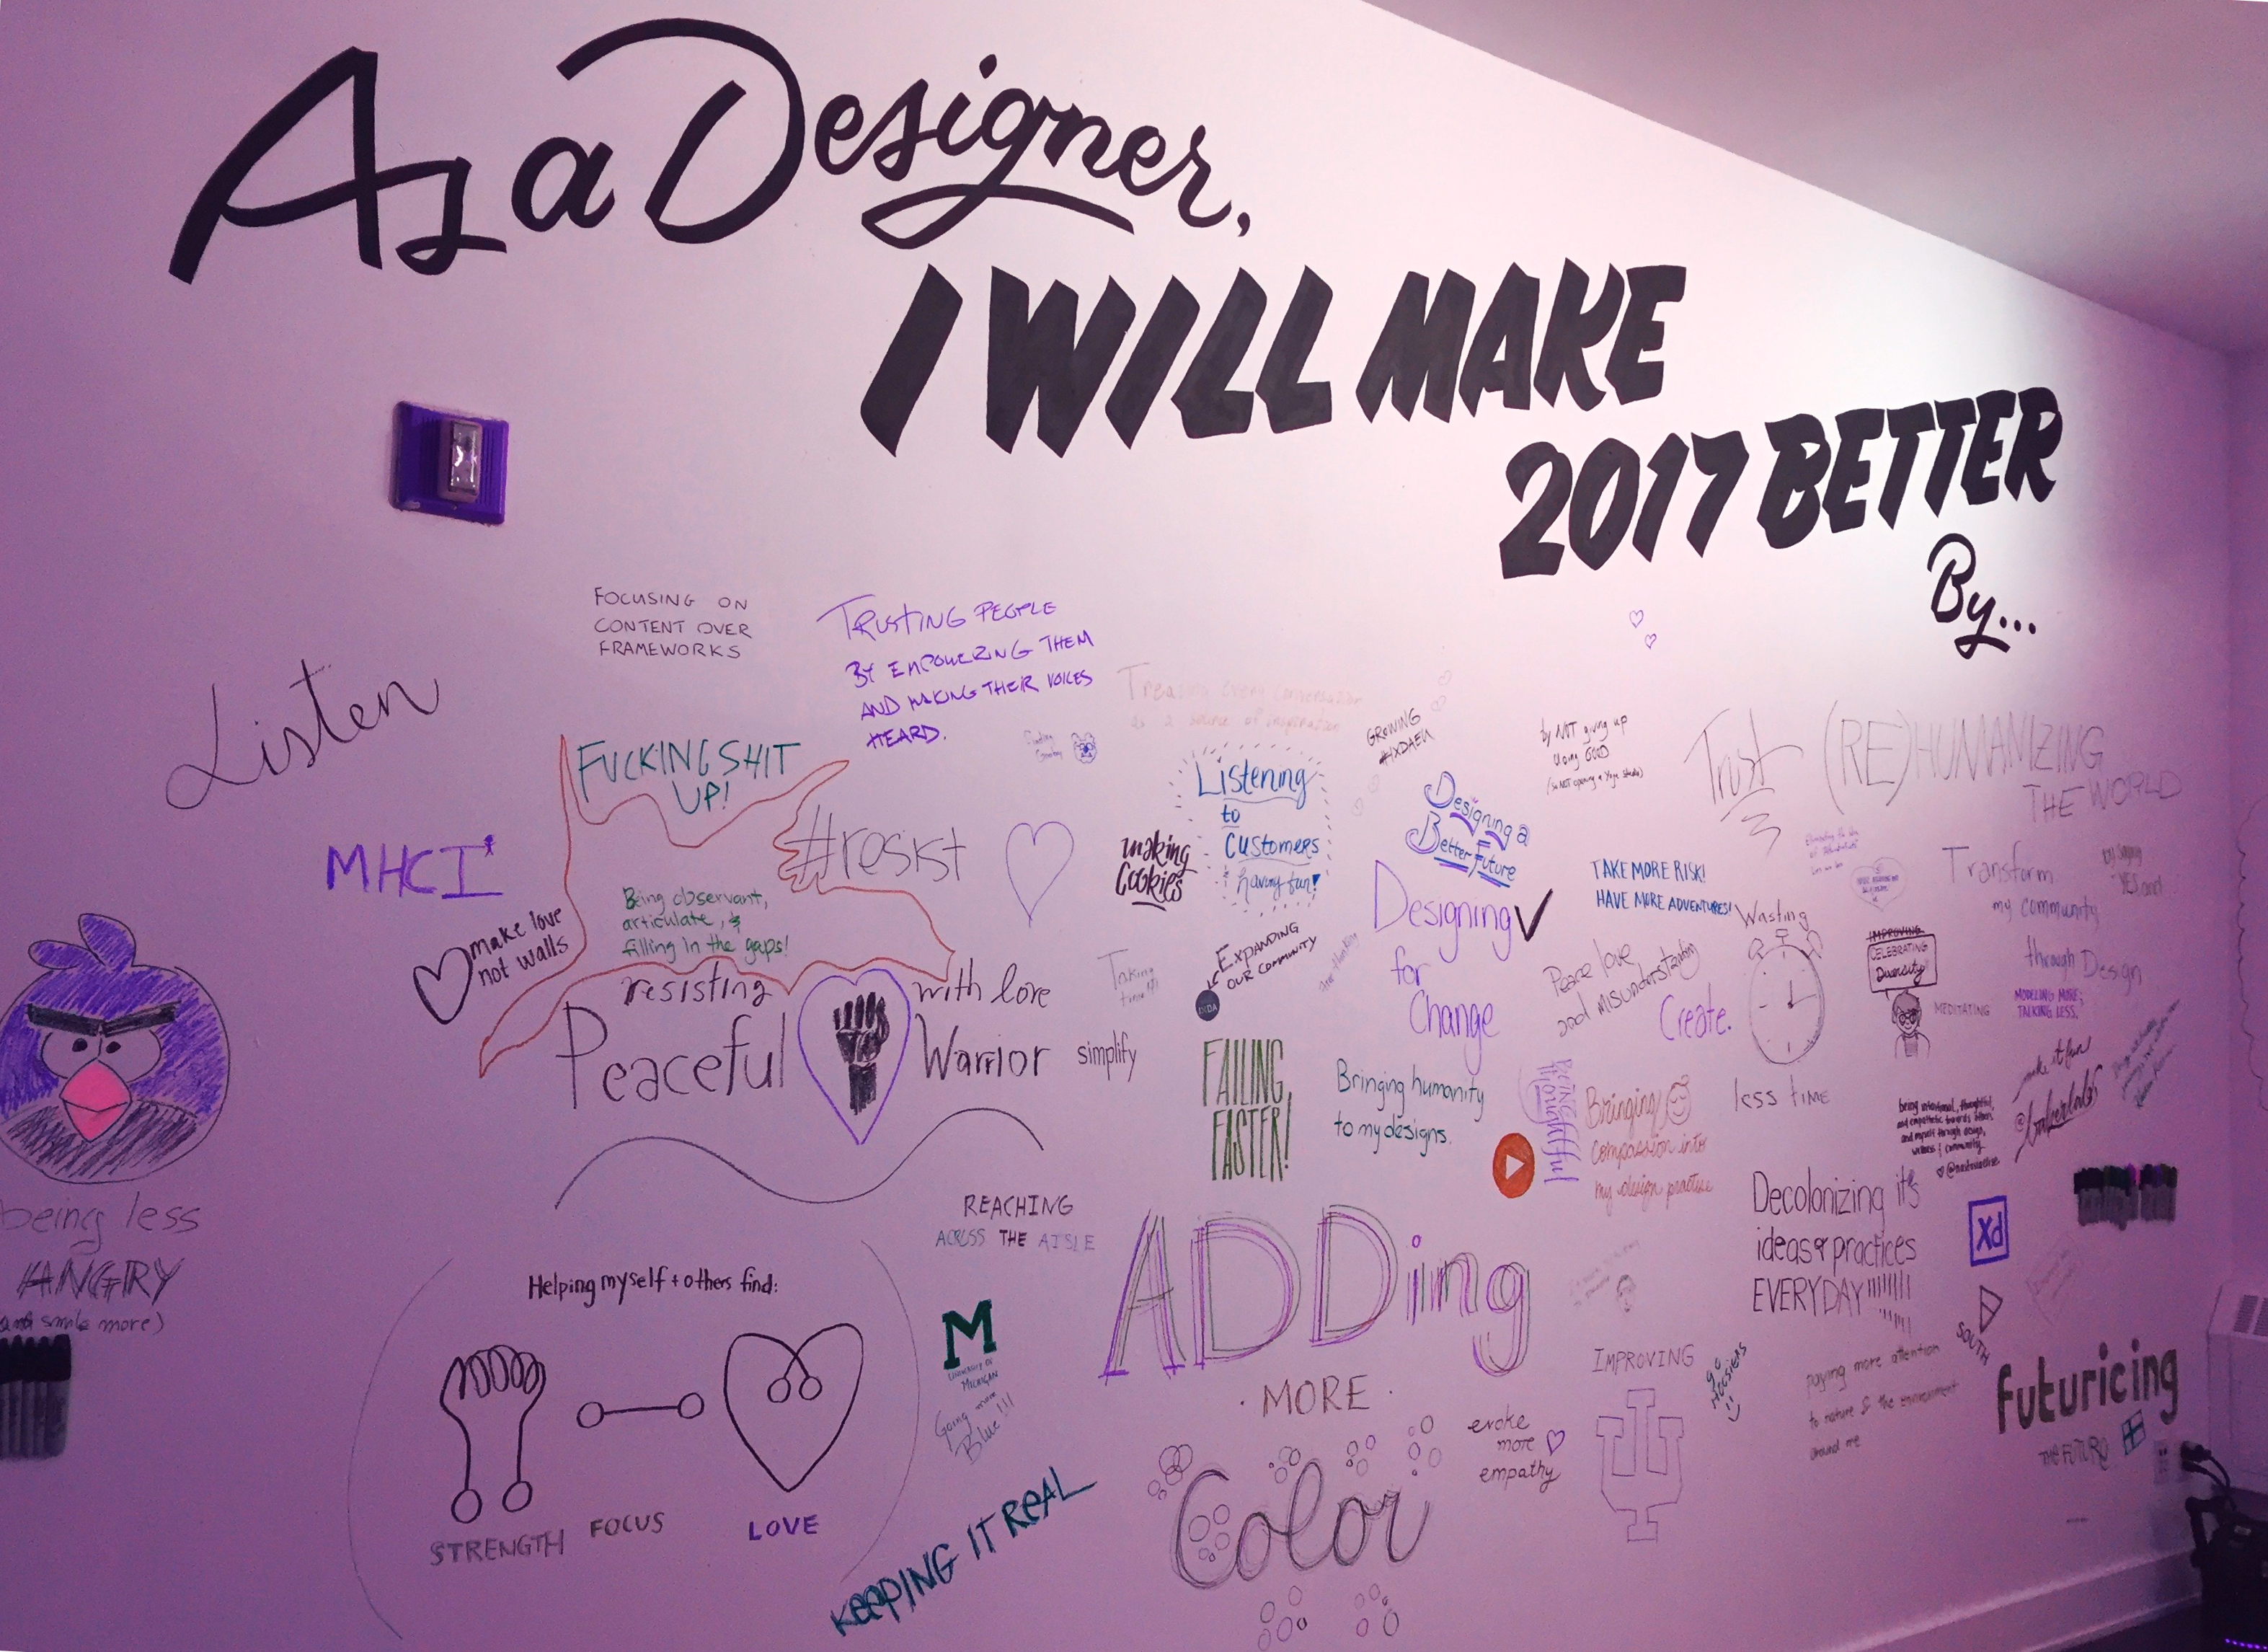 Designers write what they will do to make 2017 better.